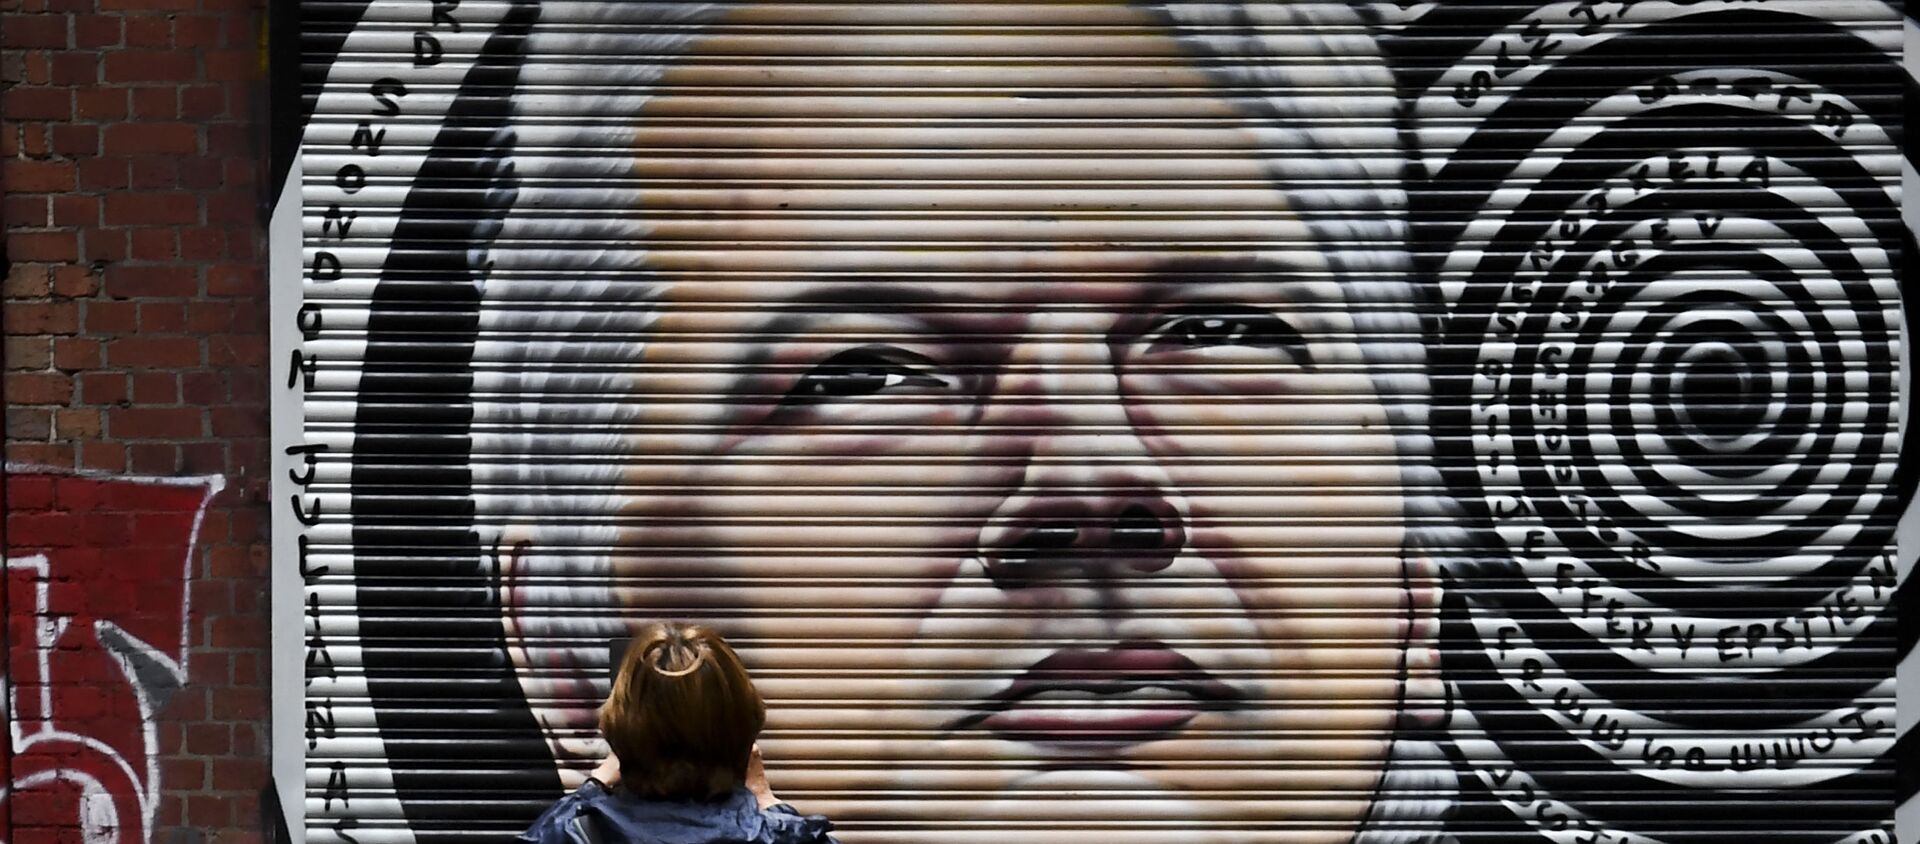 A mural of Australia's Julian Assange is seen in a lane in Melbourne on 5 January 2021, after a judge in London ruled that the WikiLeaks founder should not be extradited to the US to face espionage charges for publishing hundreds of thousands of classified military and diplomatic documents in 2010.  - Sputnik International, 1920, 05.01.2021